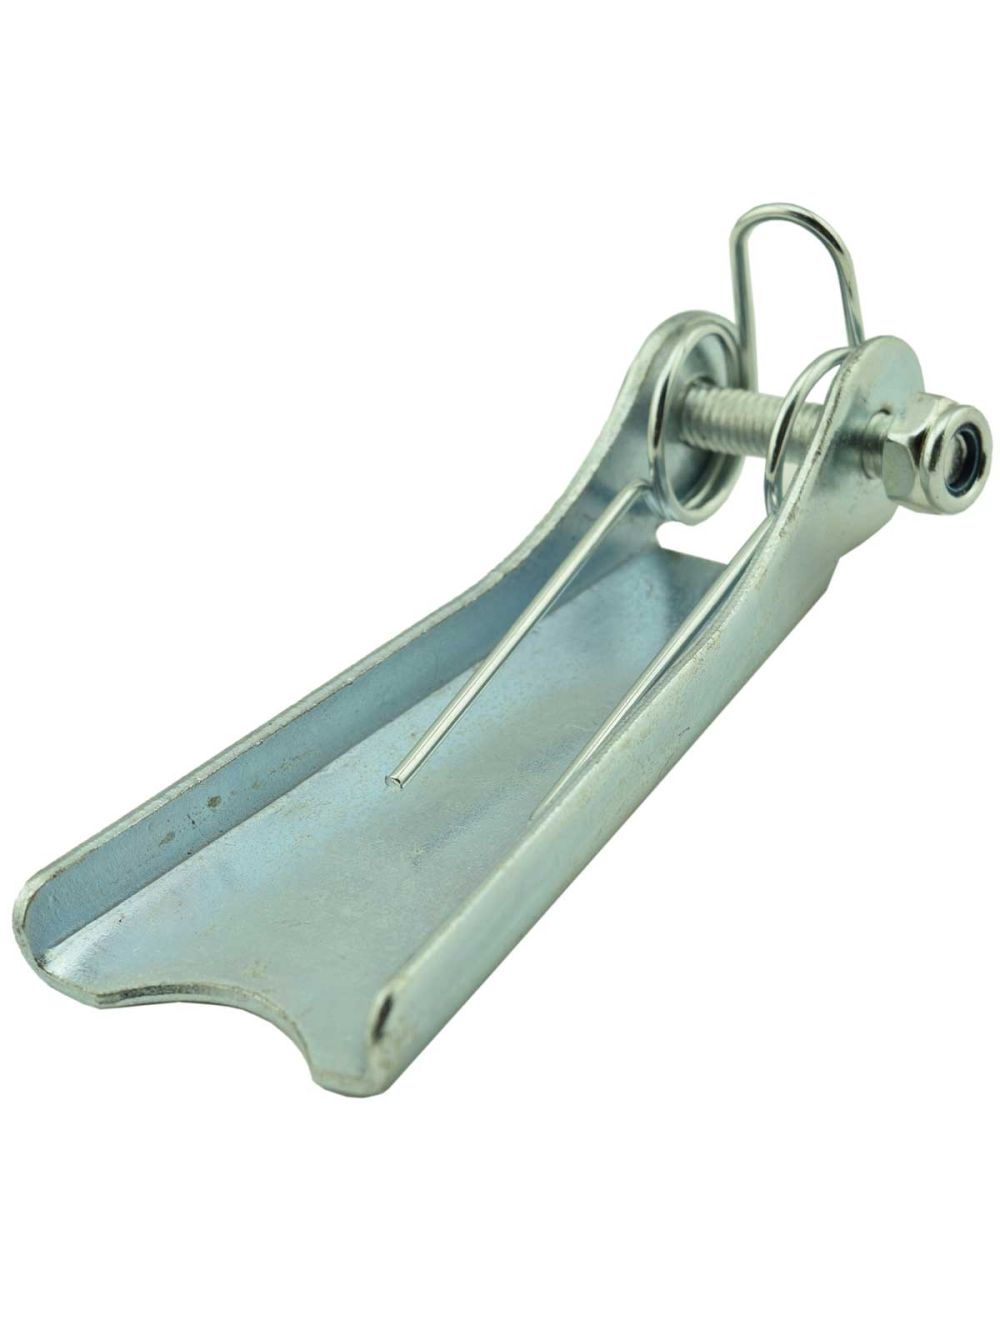 2 tonne Swivel Hook with Safety Catch - Premier Lifting and Safety Ltd